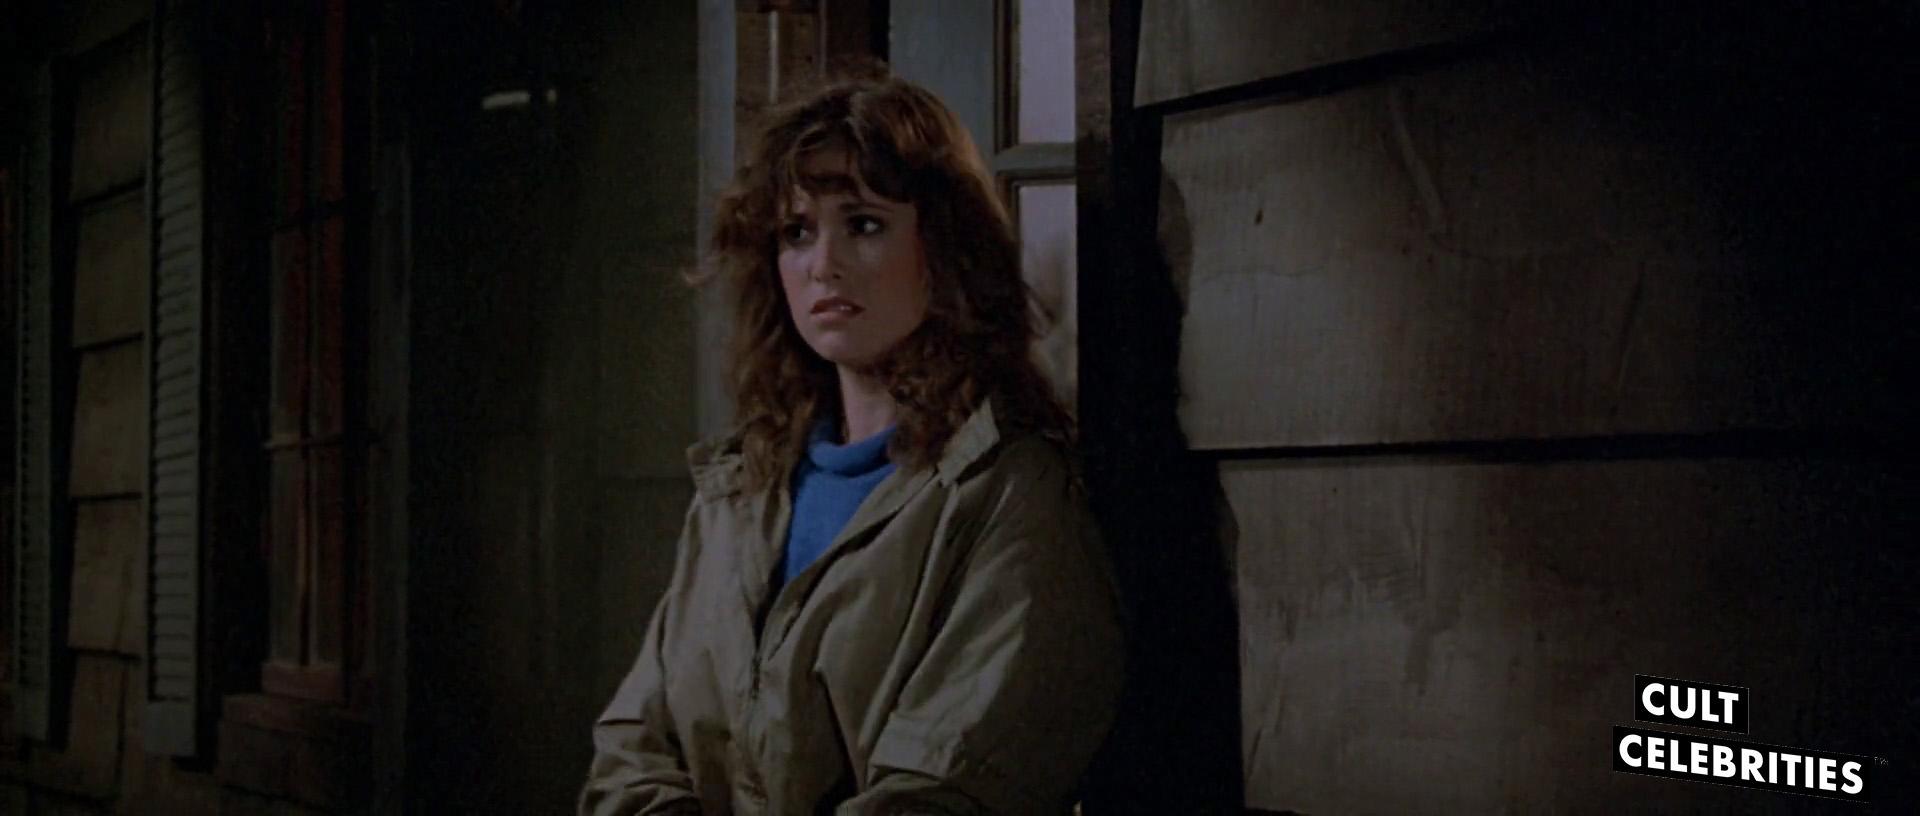 Dana Kimmell in Friday the 13th Part III (1982)